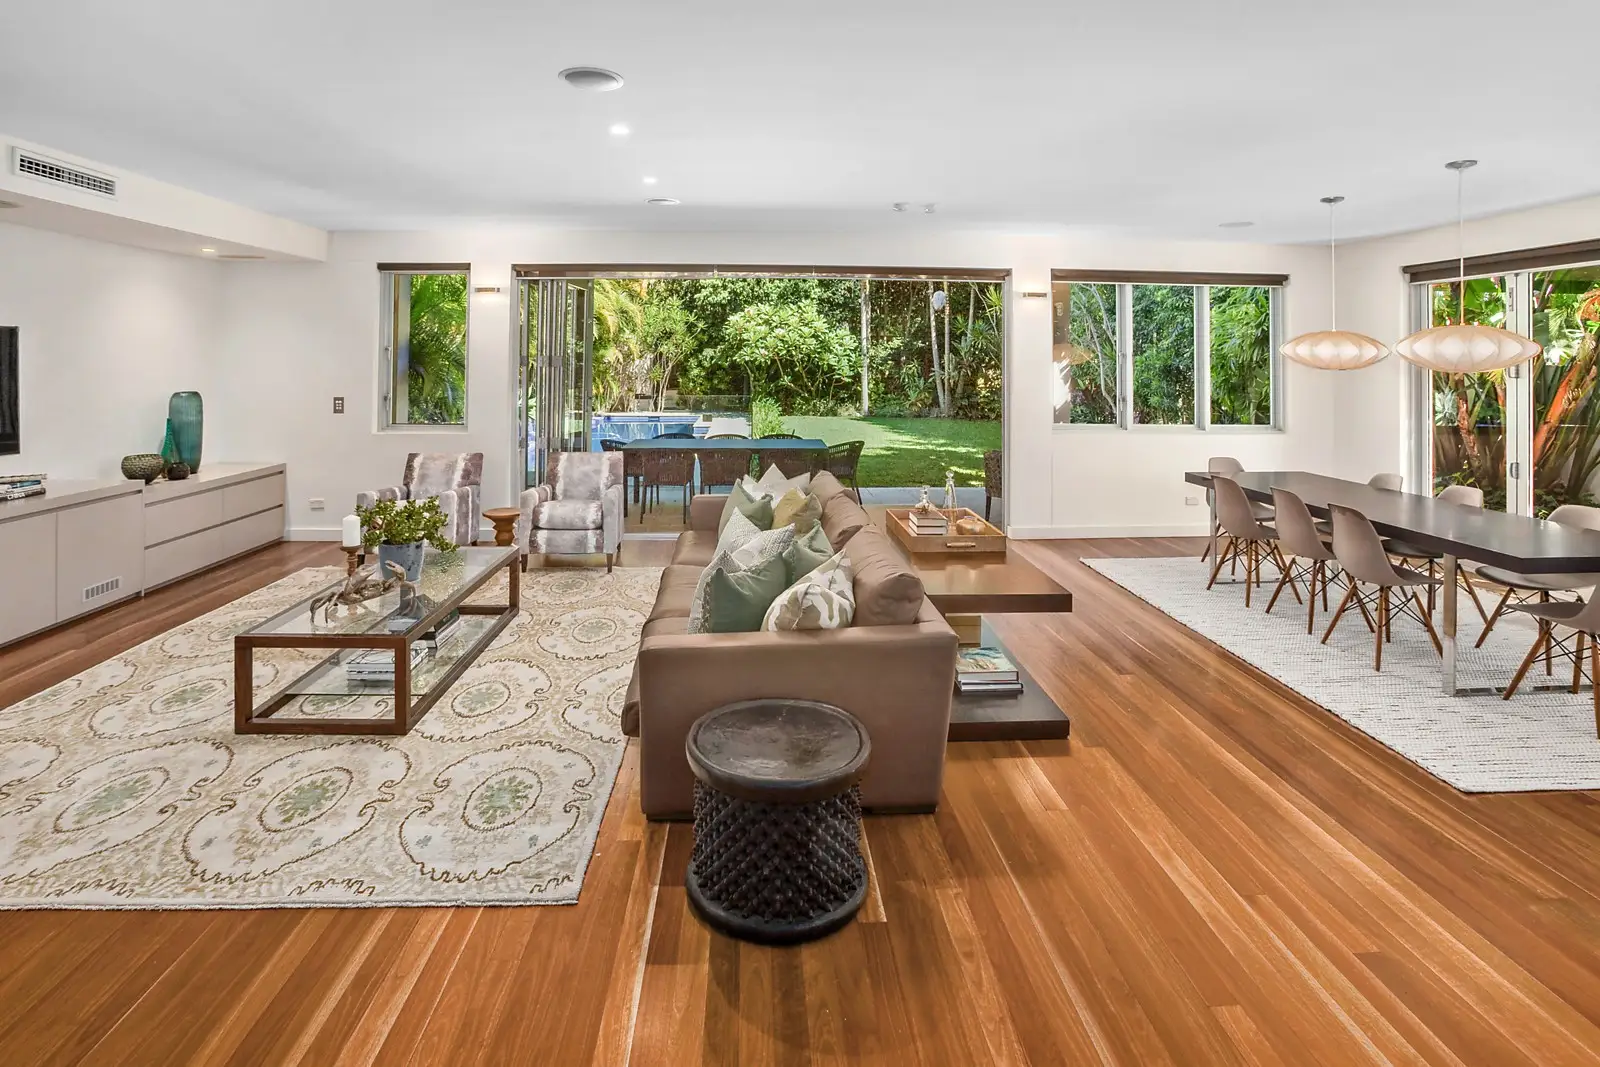 Photo #2: 48 - 50 Balfour Road, Bellevue Hill - Sold by Sydney Sotheby's International Realty